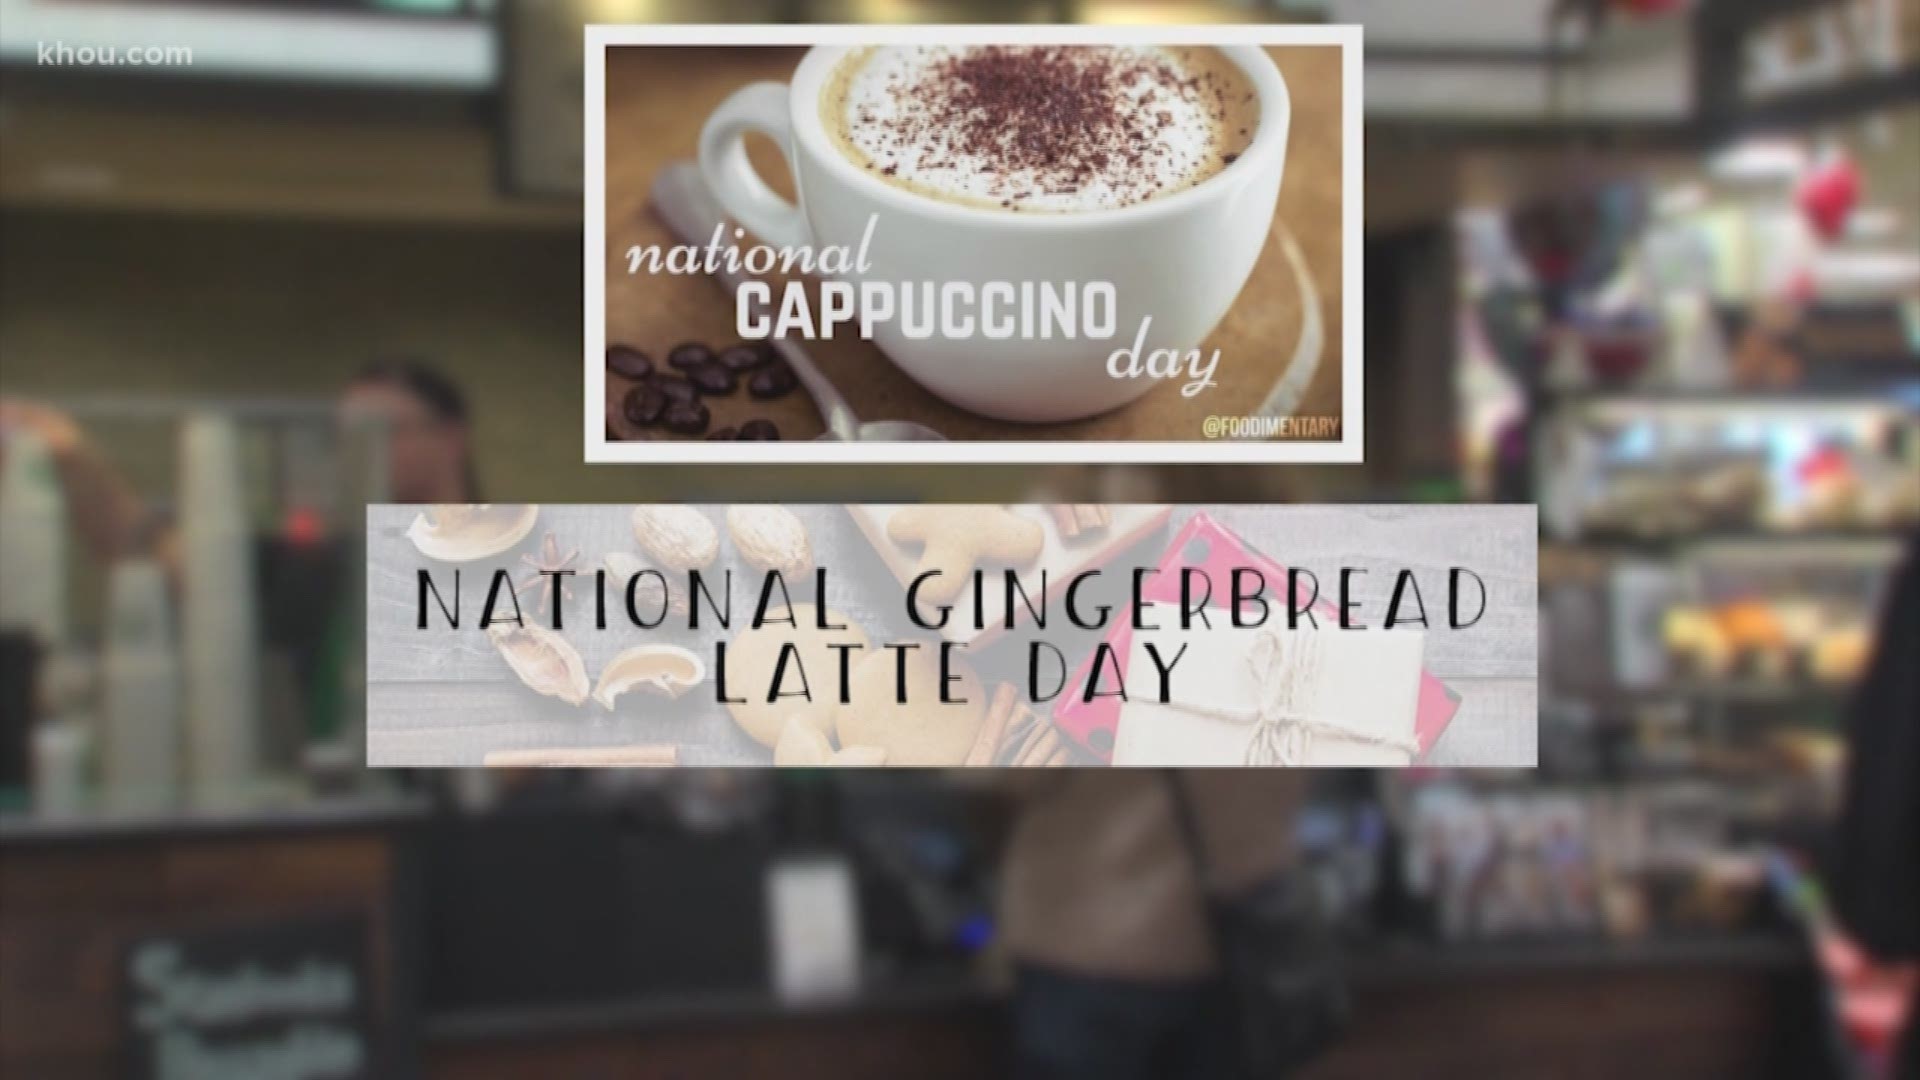 It's September which means we're probably coming up on National Pumpkin Spice Latte Day! That got us thinking: why are there so many special days? Consumer reporter John Matarese looks into the trend, that may be getting out of hand so you don't waste your money.